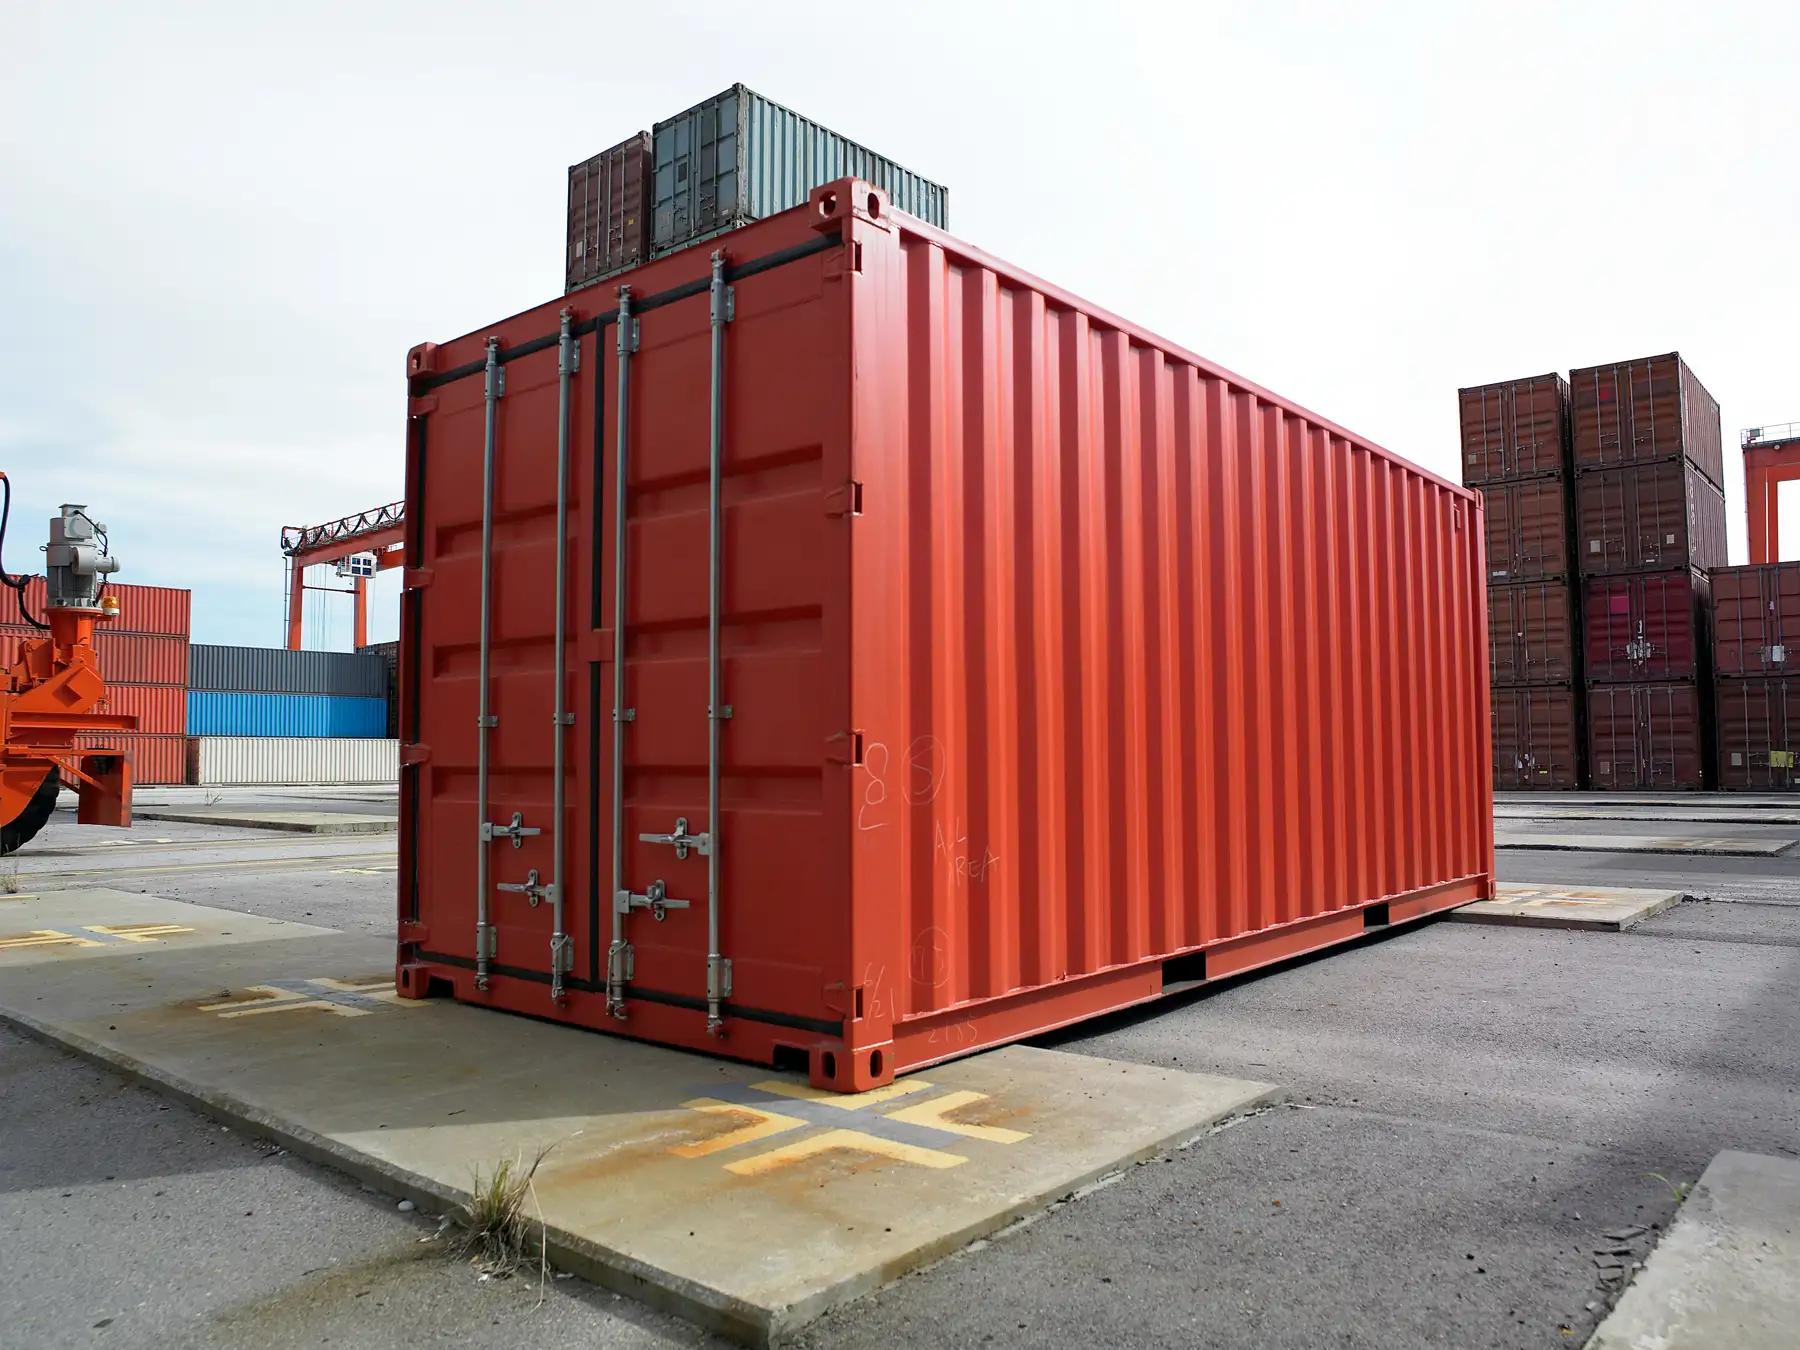 How Much Does a Shipping Container Cost